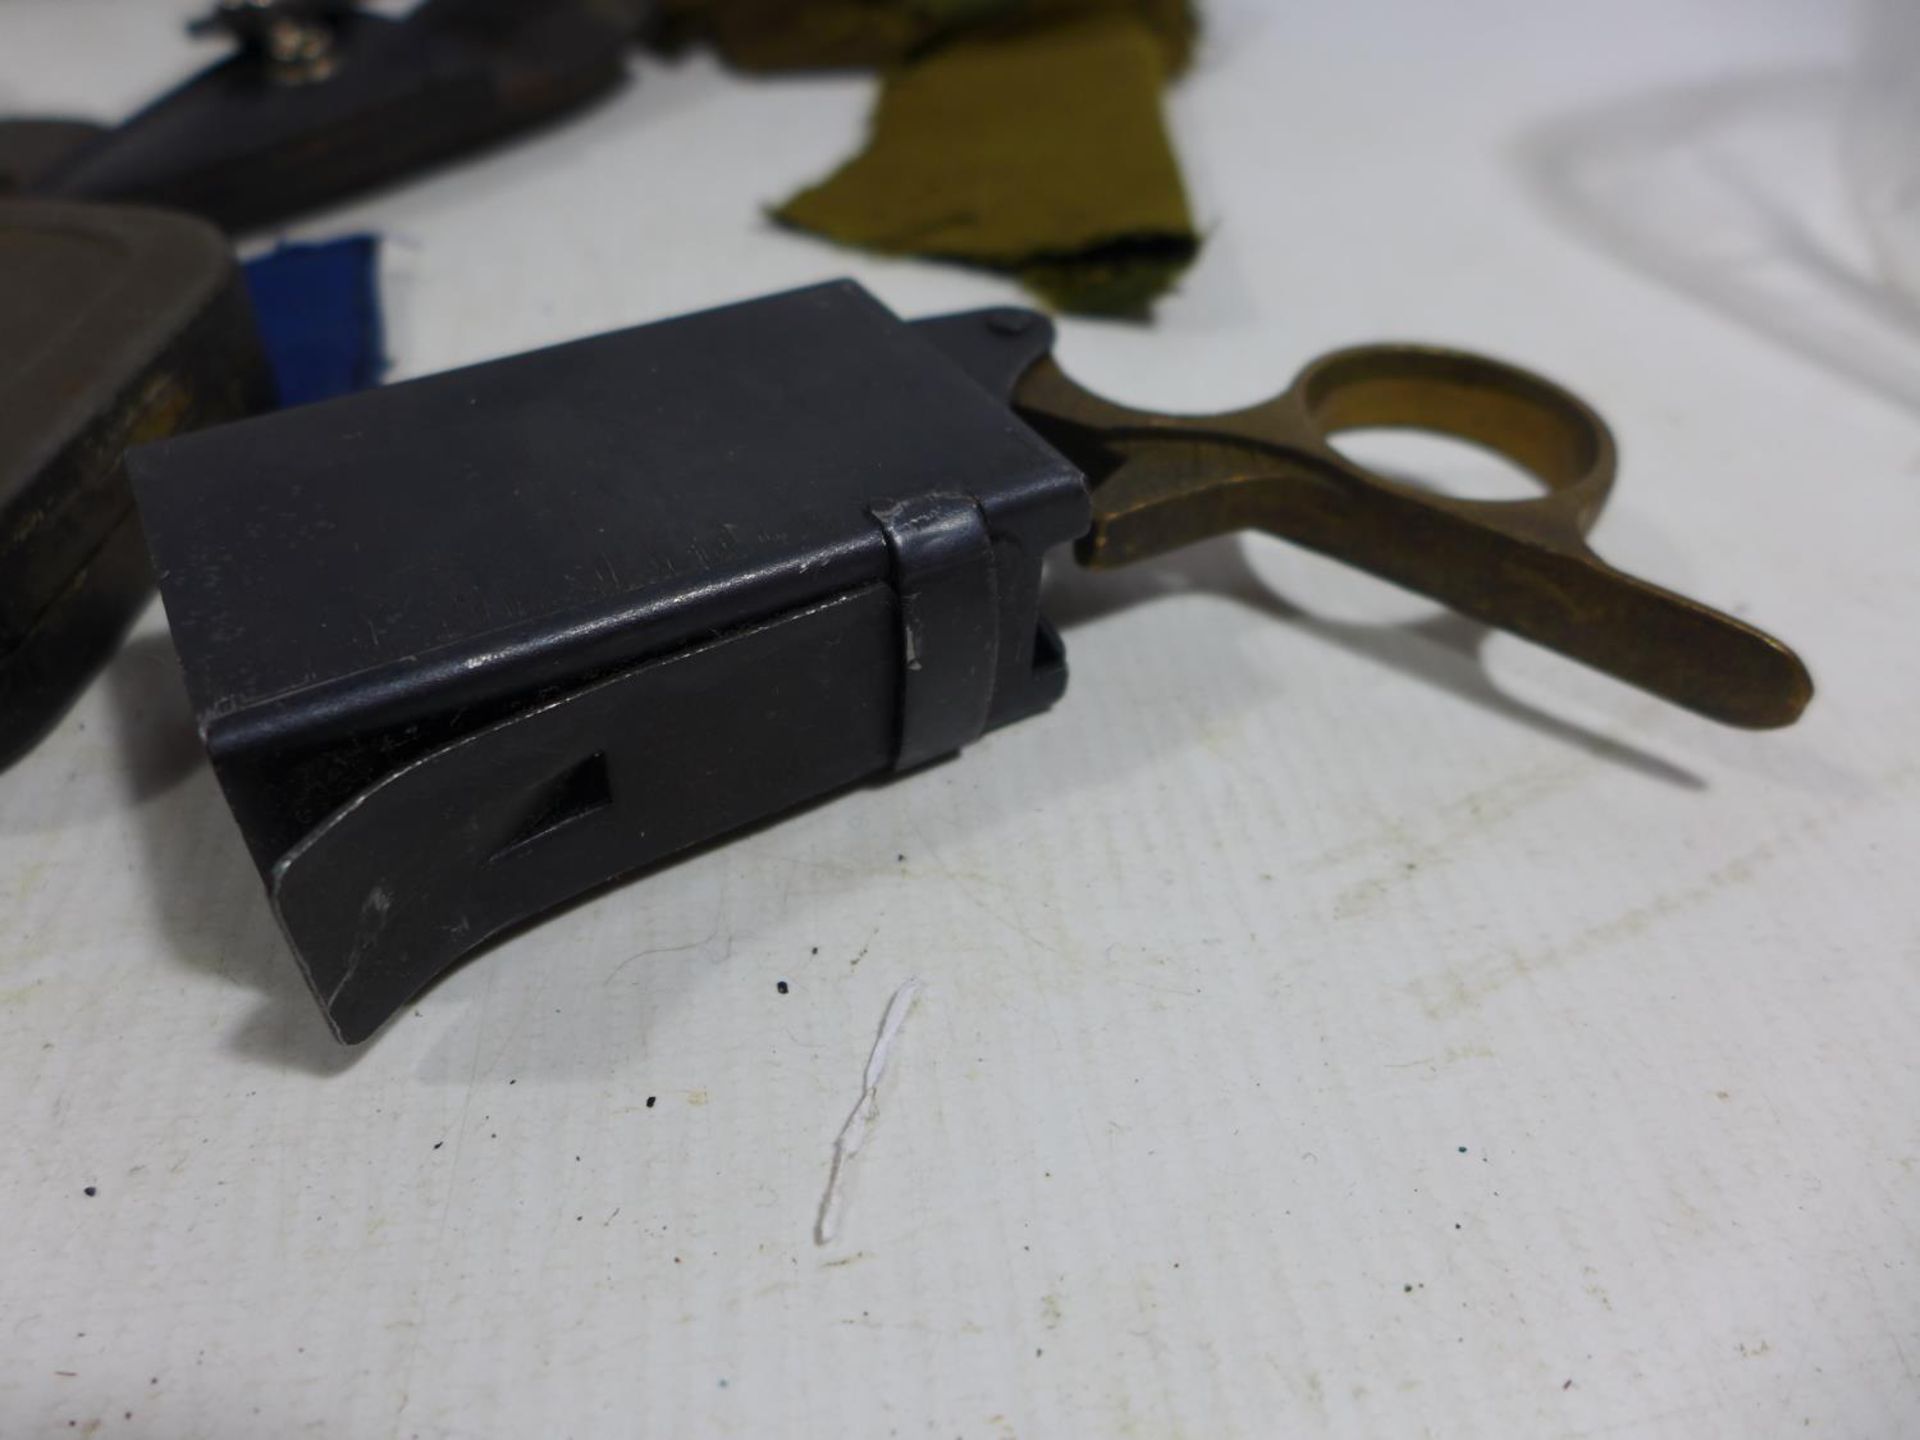 A MILITARY FUSE SETTER, FOLDER STOP, ASSORTED MILITARY ITEMS ETC - Image 5 of 6